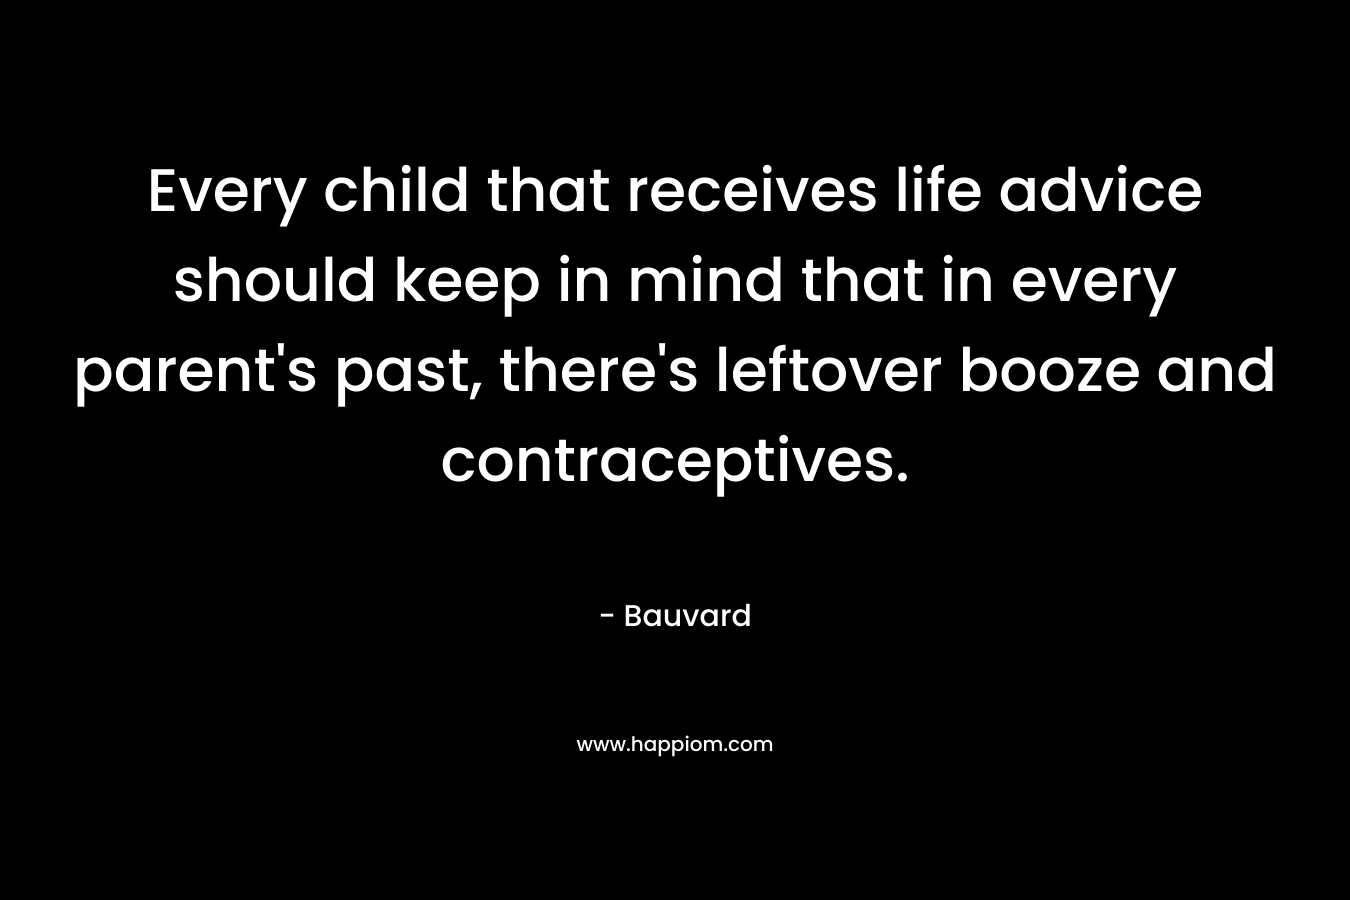 Every child that receives life advice should keep in mind that in every parent’s past, there’s leftover booze and contraceptives. – Bauvard